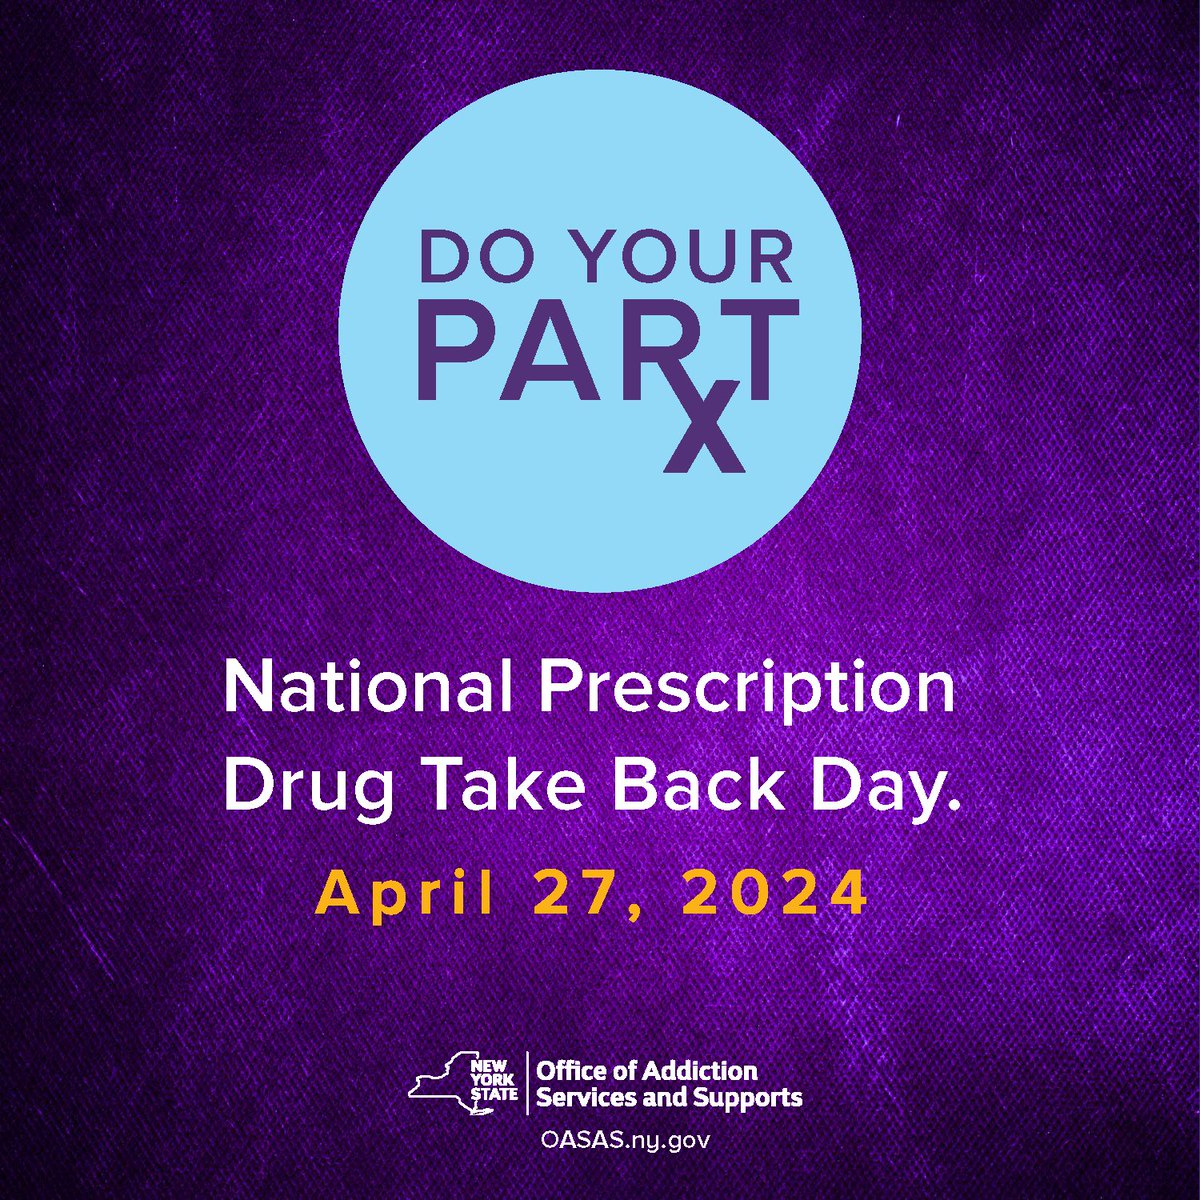 Dispose of your unneeded Rx drugs, no questions asked! #TakeBackDay is Saturday, April 27, from 10 am to 2 pm. Find a collection site near you at dea.gov/takebackday#co… #TakeBackDay